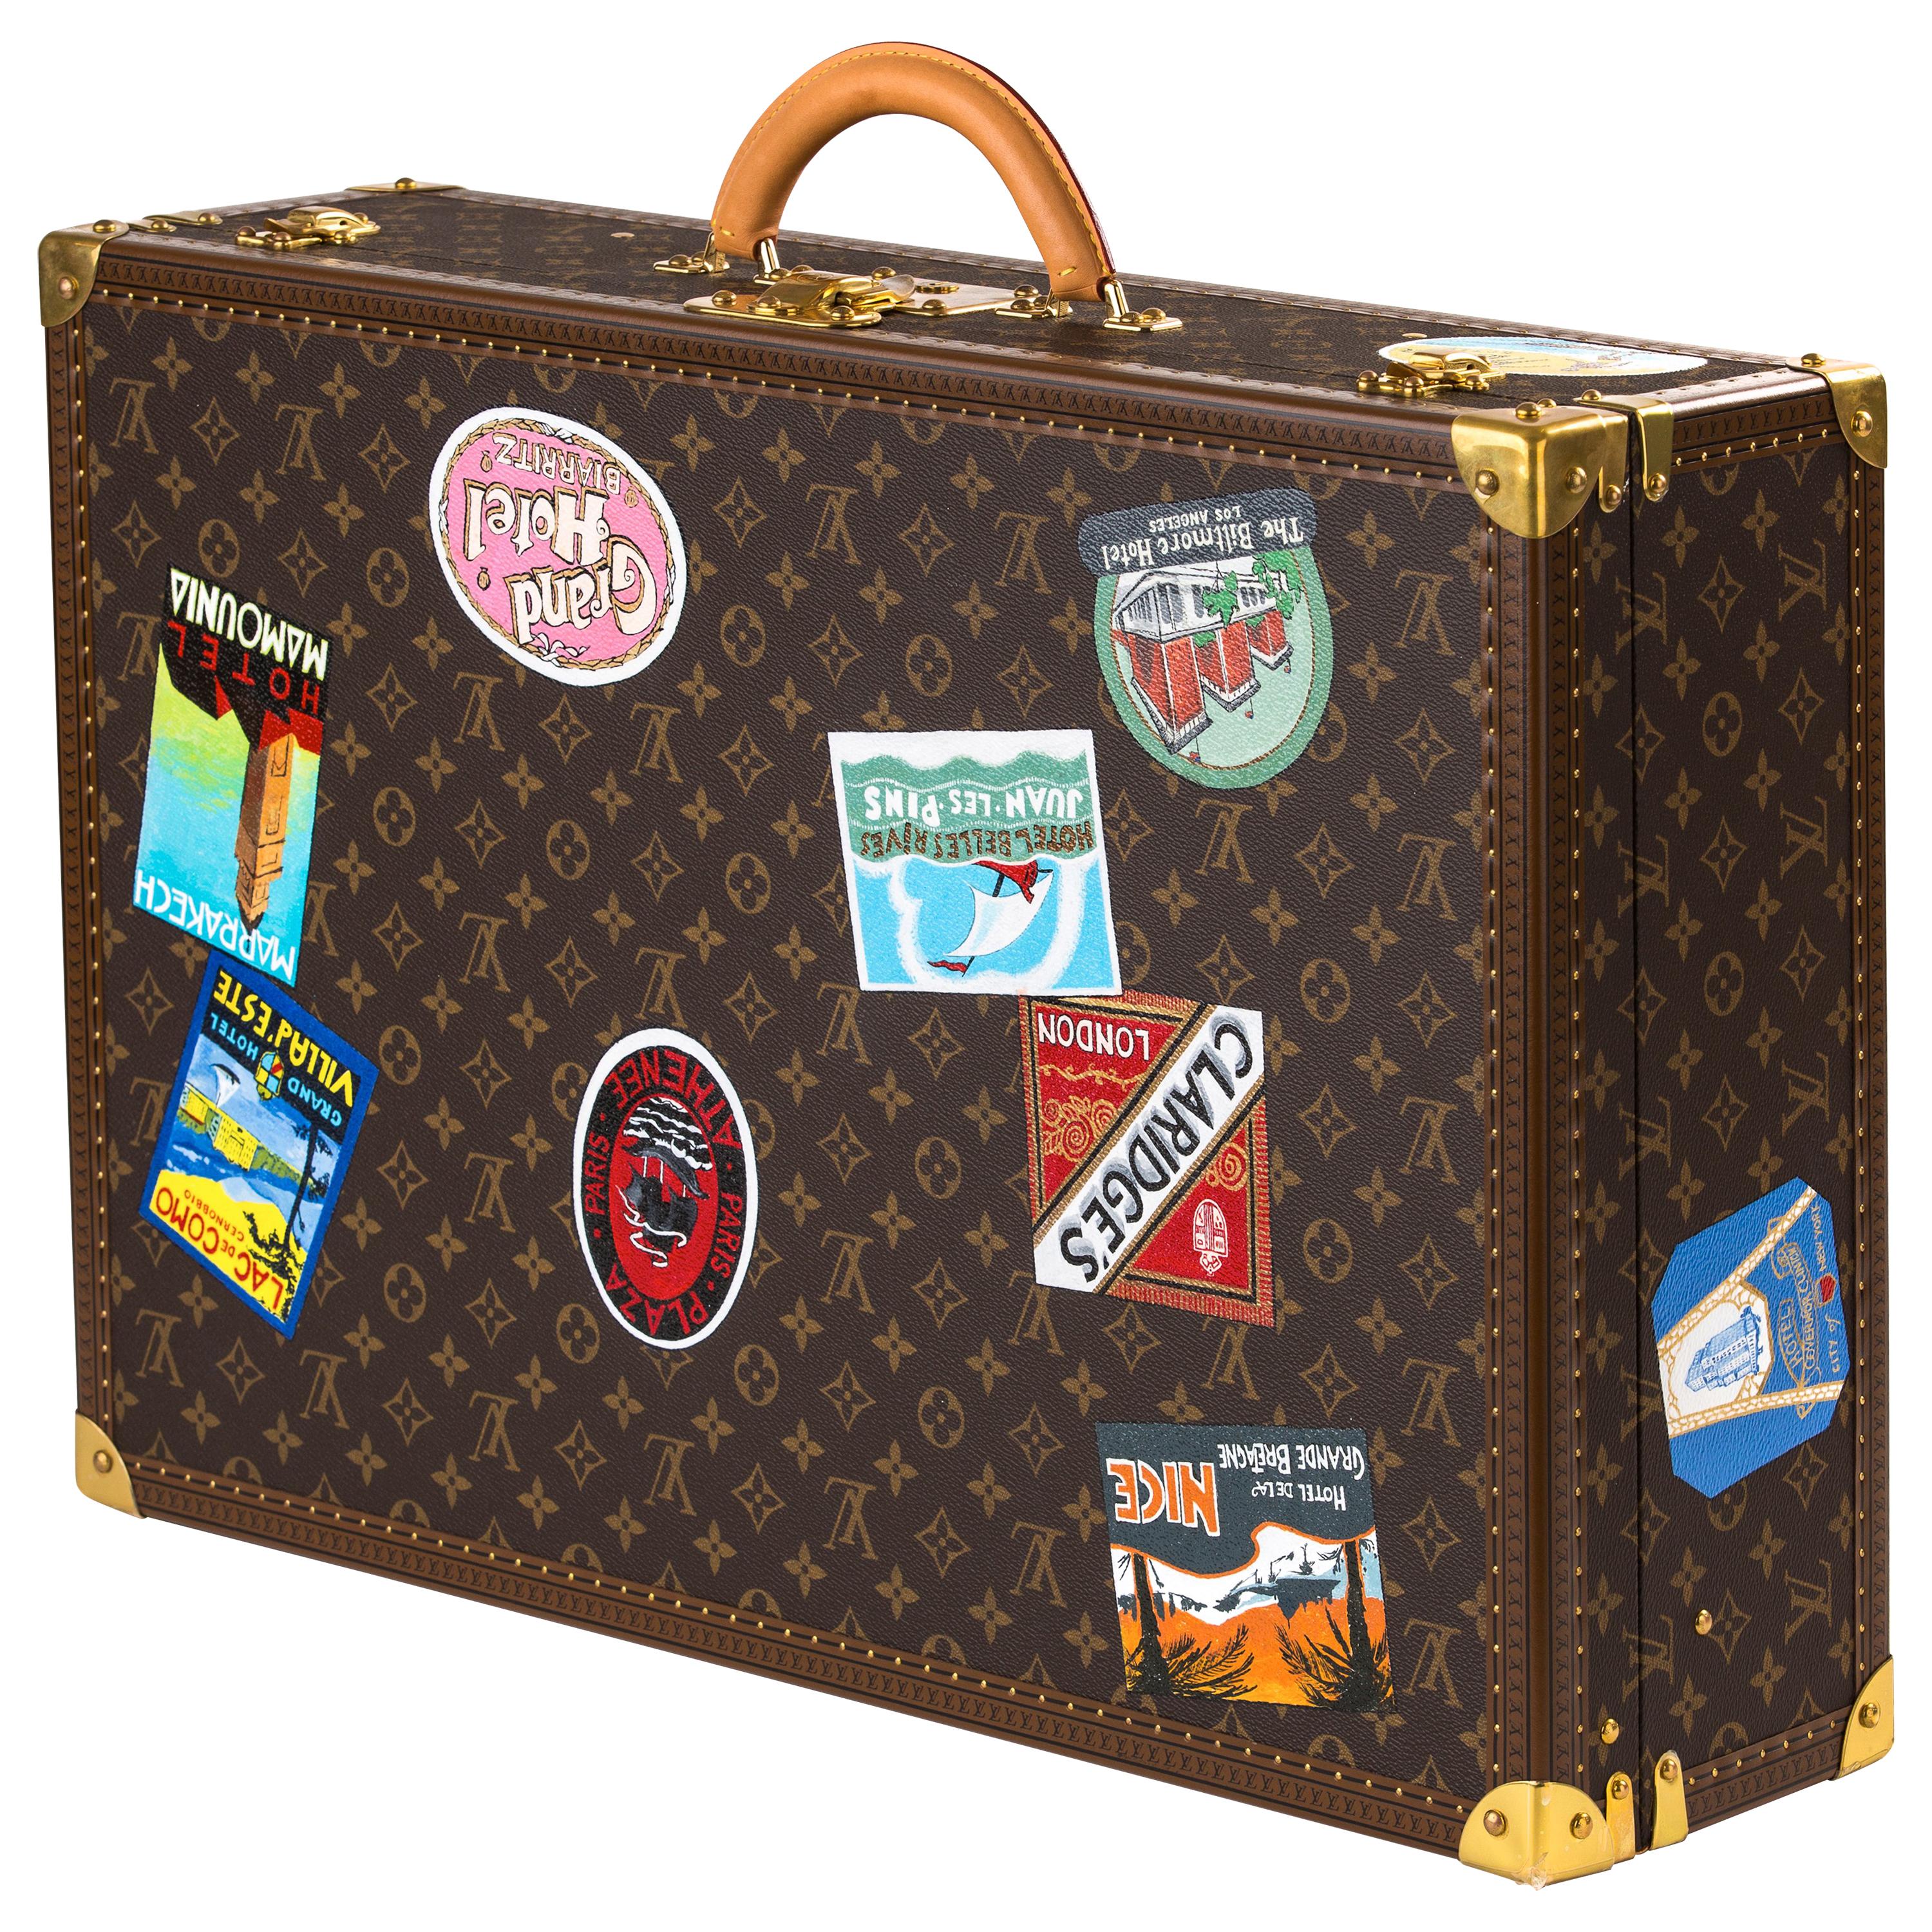 Louis Vuitton's Classic Bisten Suitcase Now Comes in Sturdy